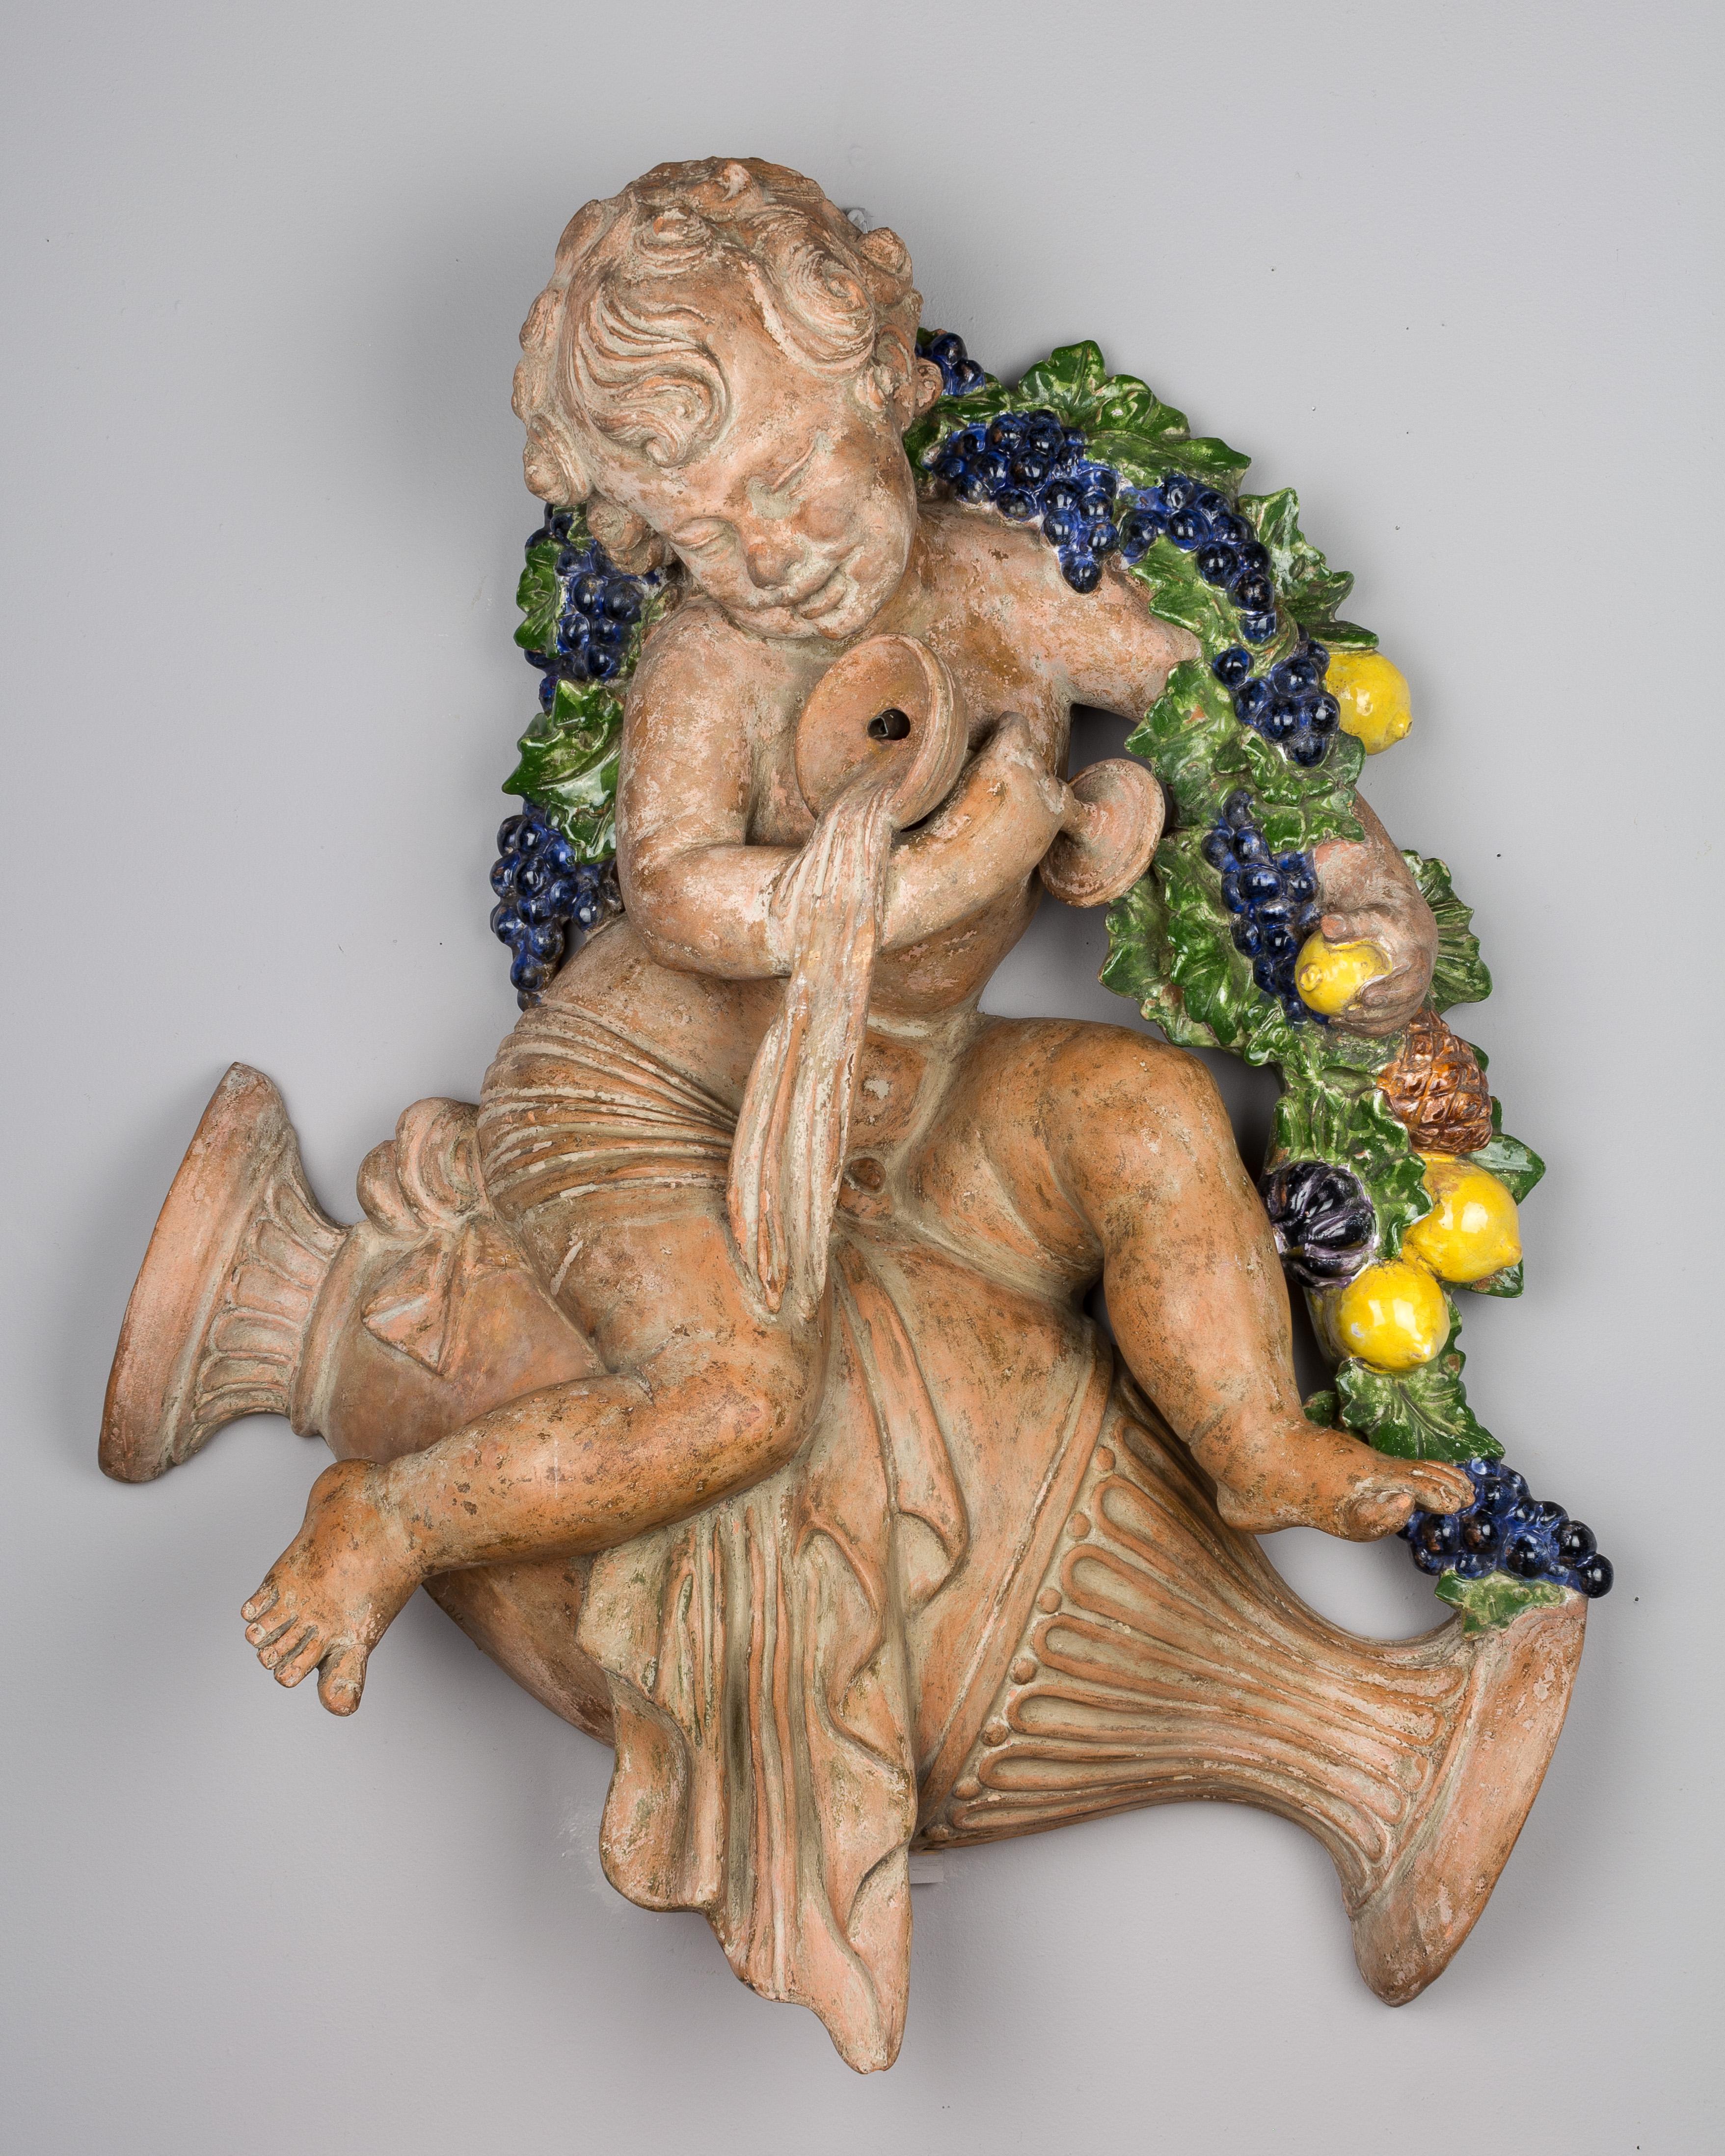 A French terracotta fountain in three parts, with a whimsical sculptural relief of a young Bacchus. Adorned with a colorful glazed terracotta garland of grapes and lemons, he sits astride a toppled urn, spilling his cup into the shell shaped basin